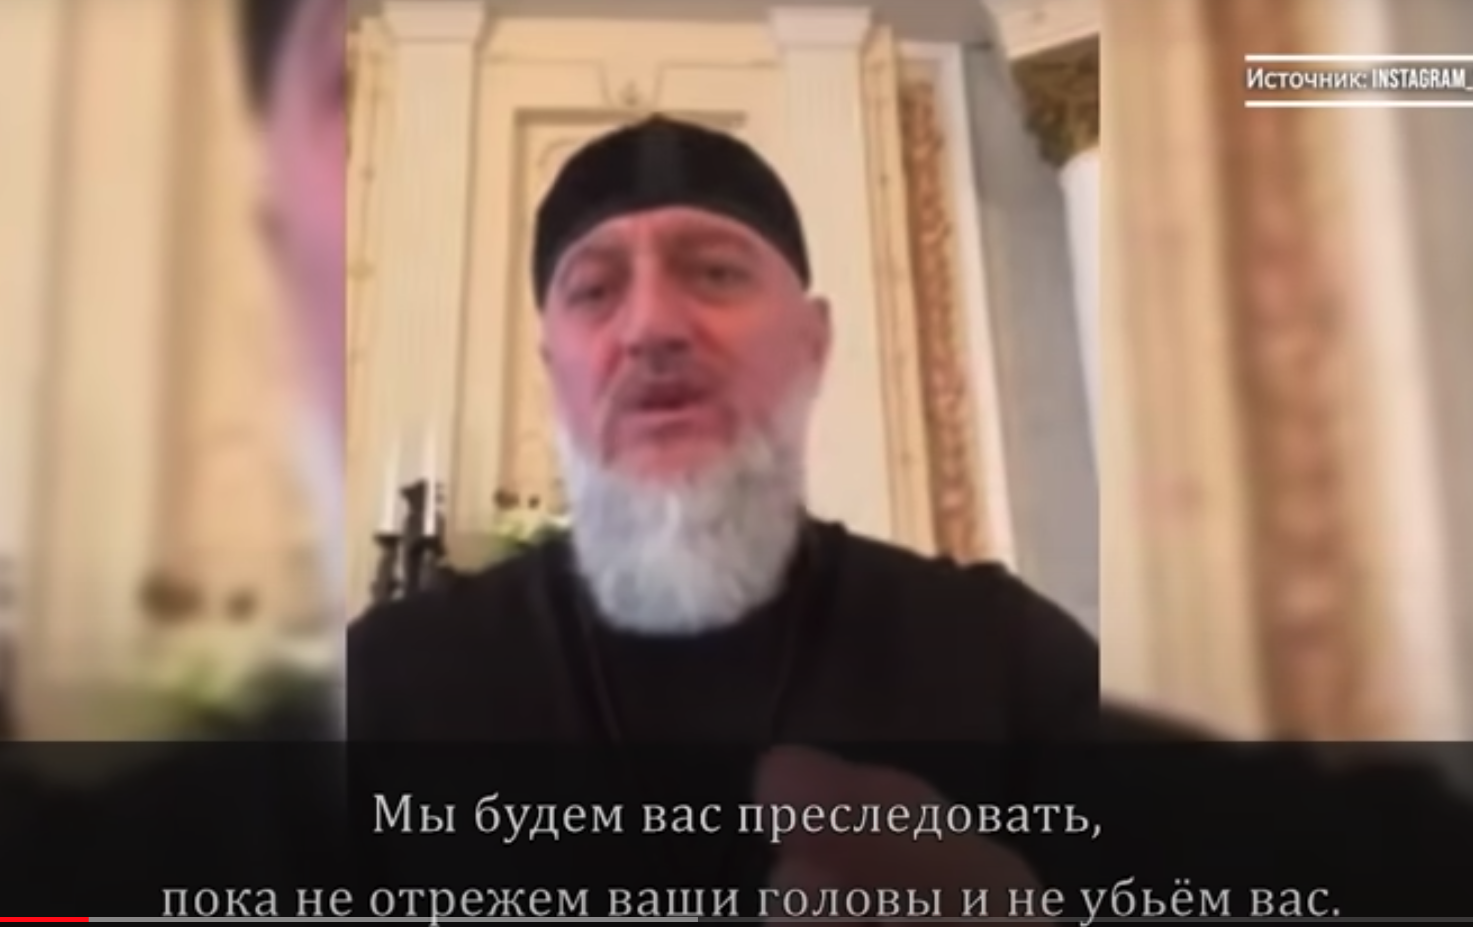 State Duma deputy from Chechnya announced that he would cut off the heads of the Yangulbayev family